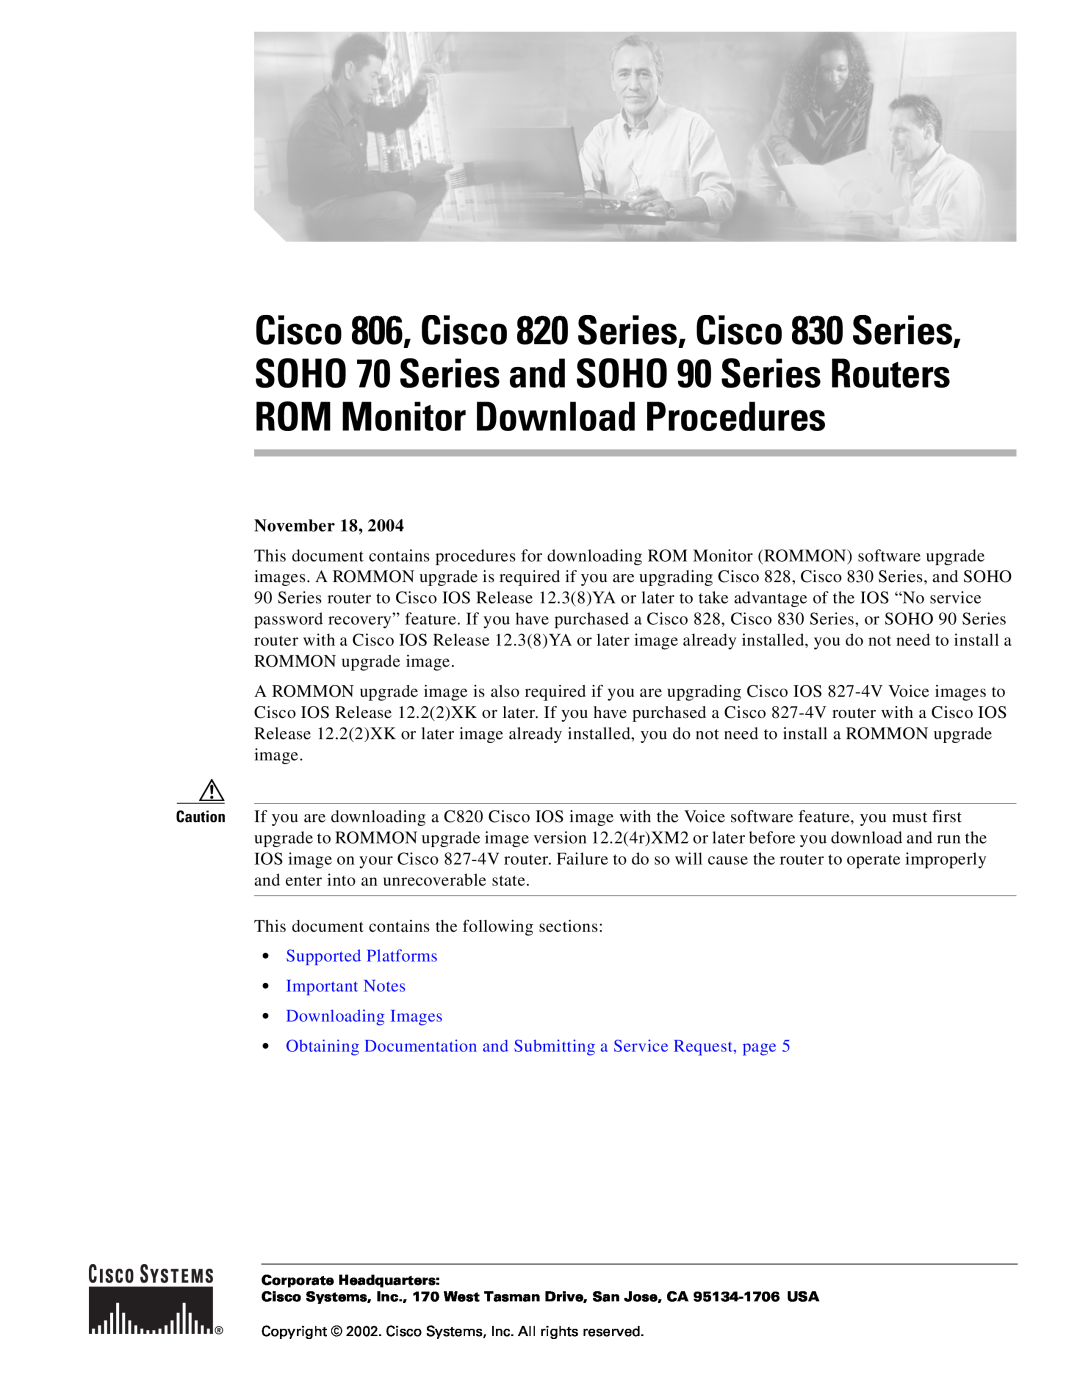 Cisco Systems 806 Series, 830 Series manual November 18, Supported Platforms Important Notes Downloading Images 